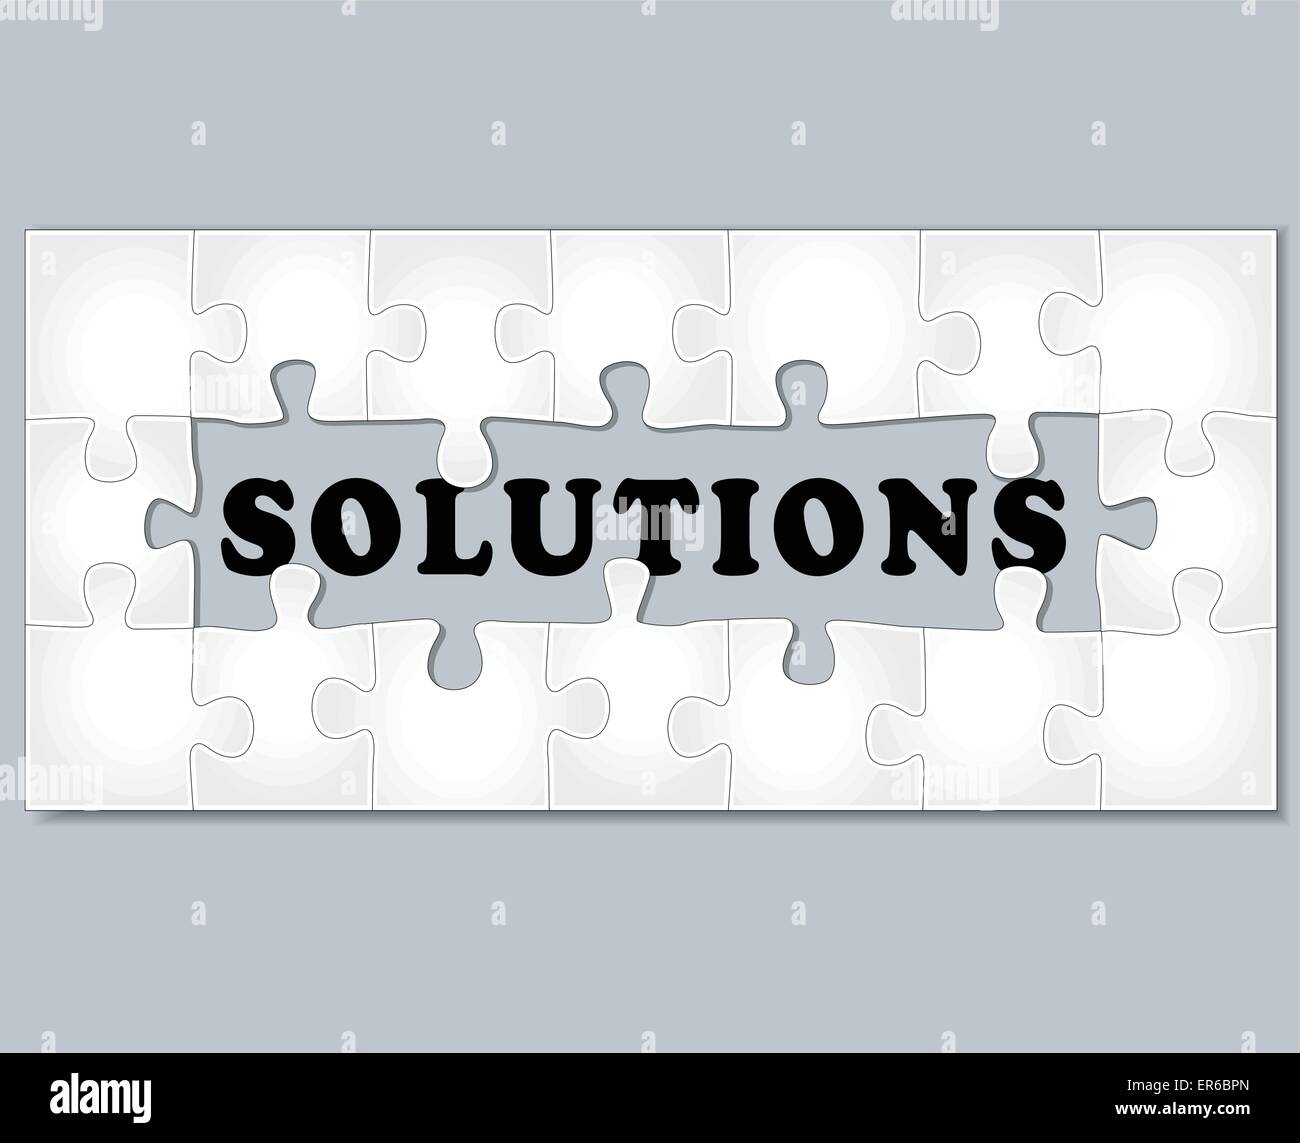 Vector illustration of solutions jigsaw puzzle abstract concept Stock Vector